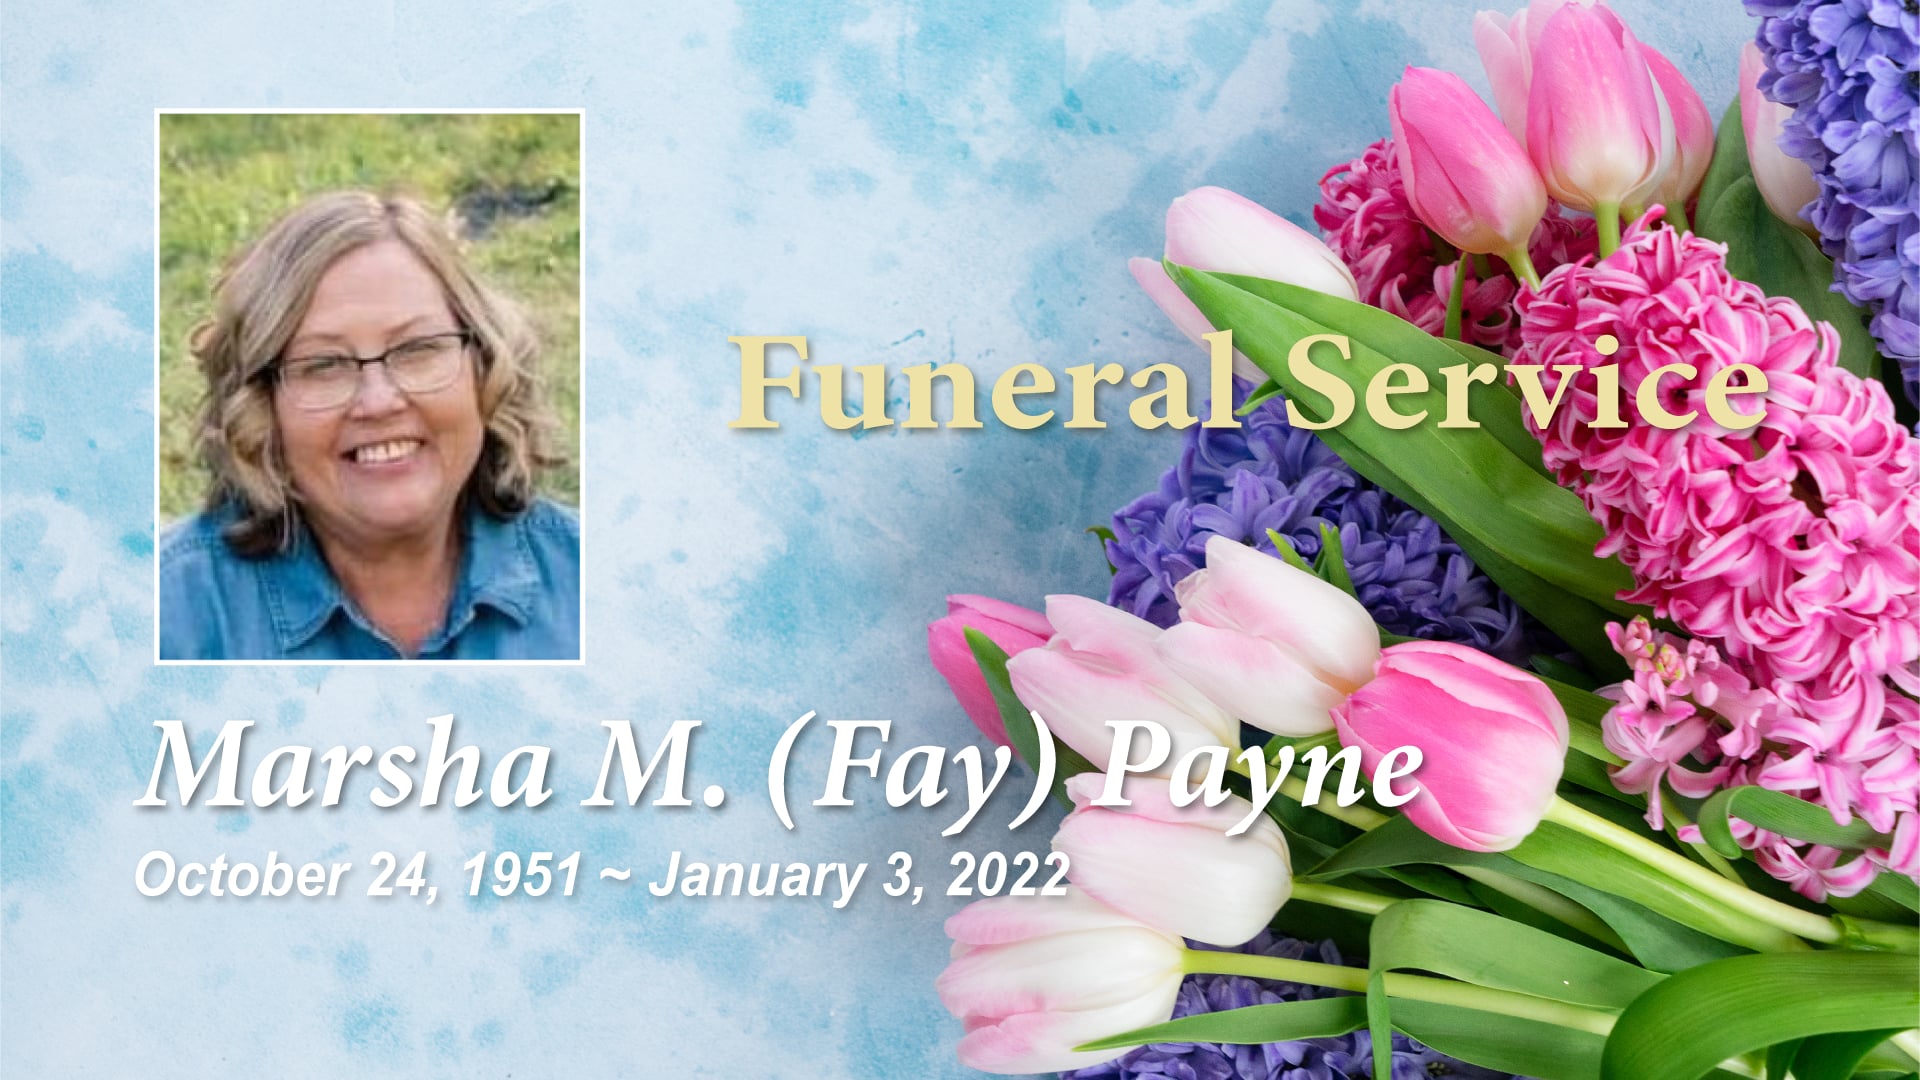 Funeral Service for Marsha Payne